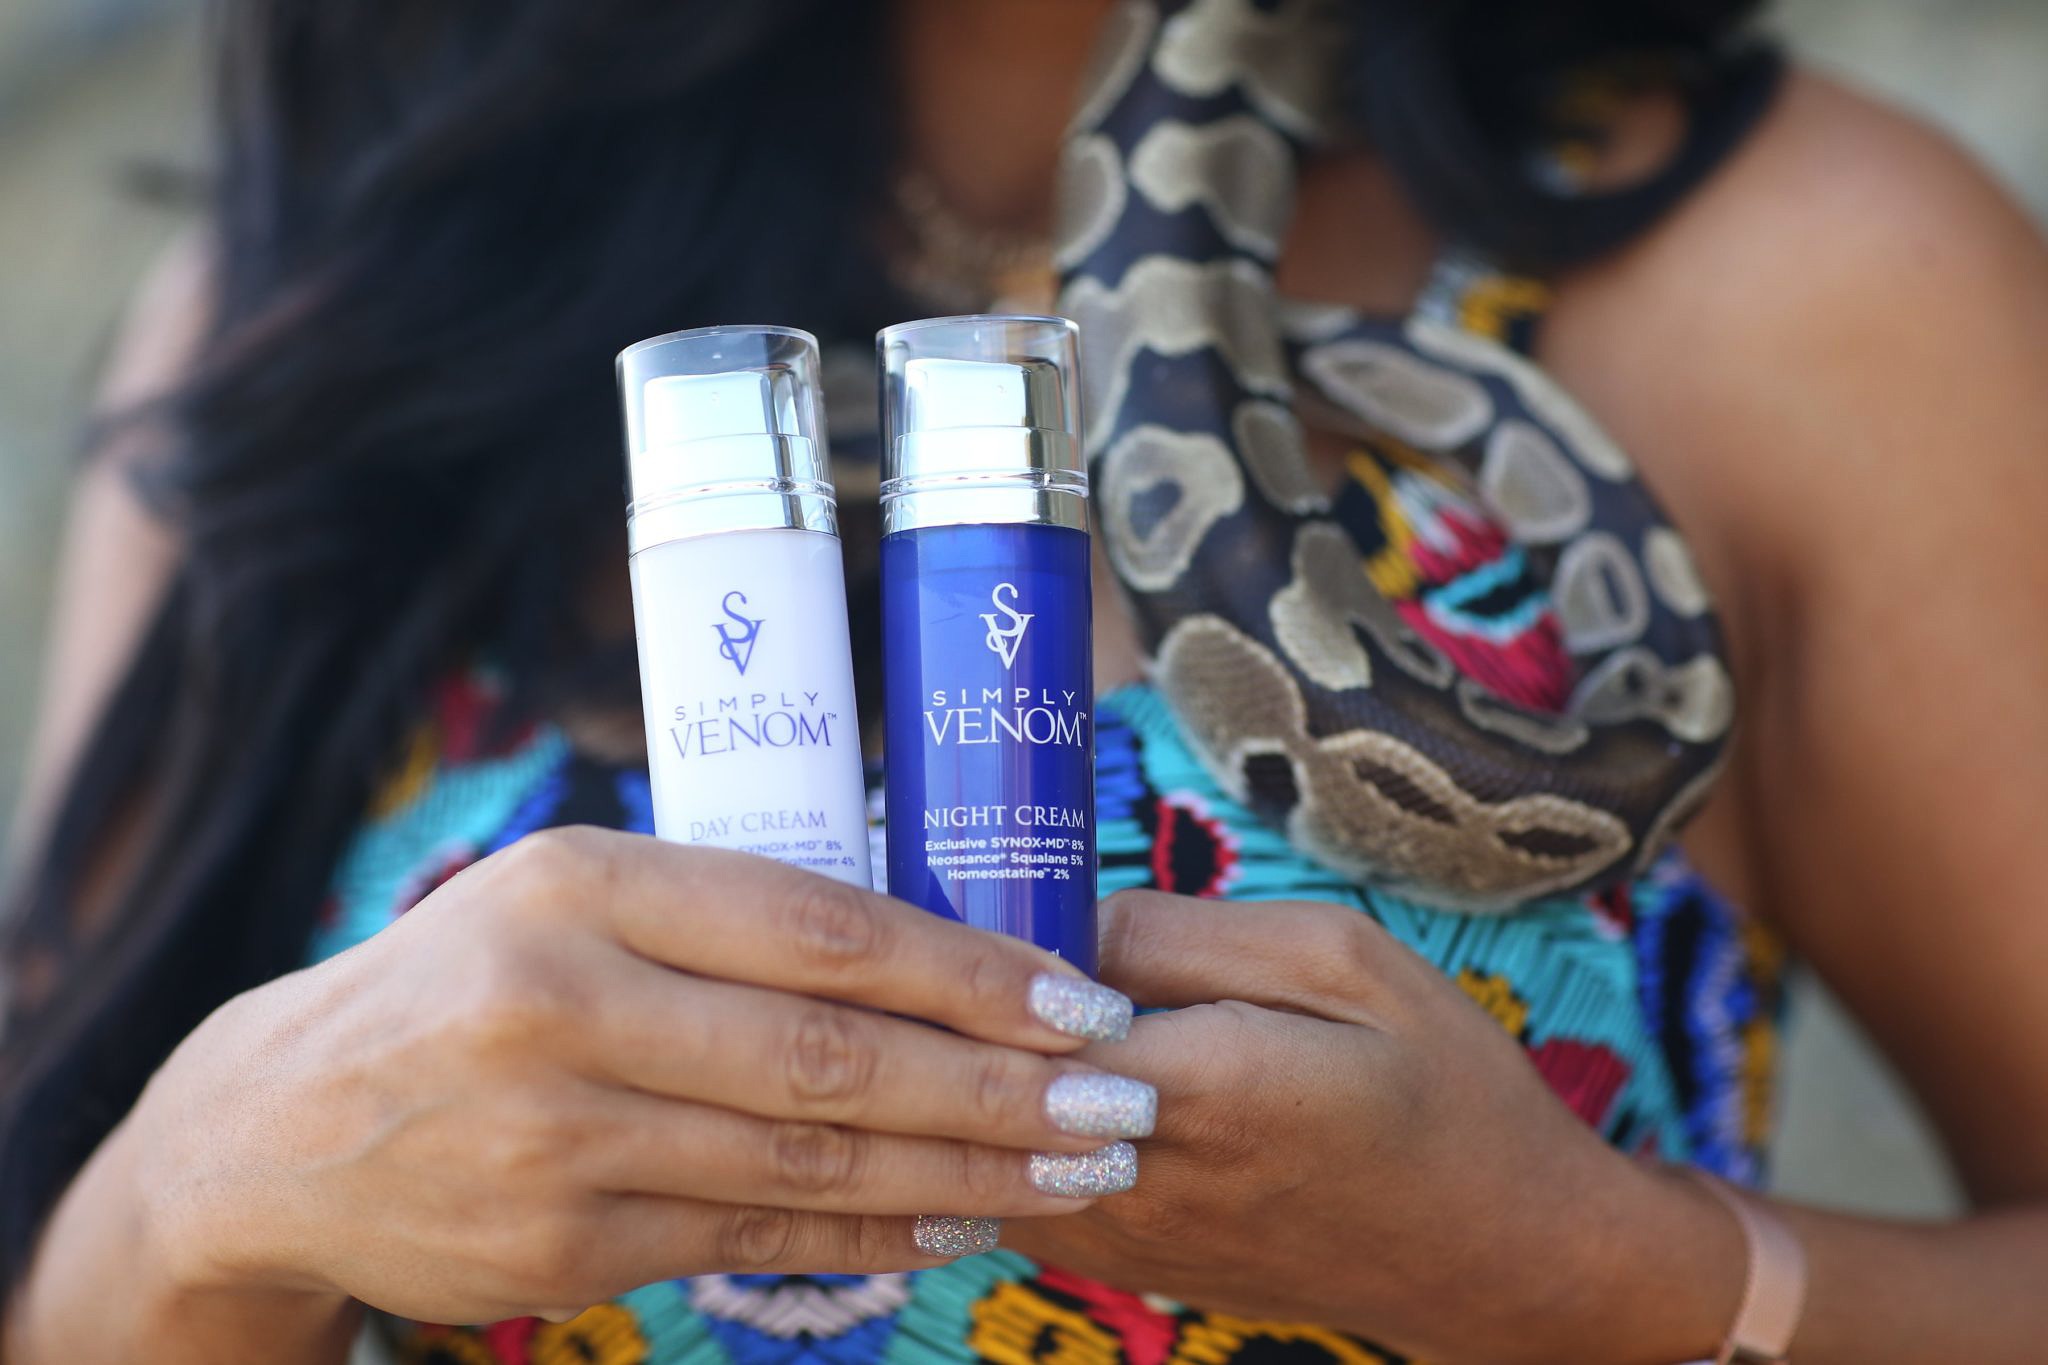 Debbie Savage of To Thine Own Style Be True's Review on Simply Venom Skin Care